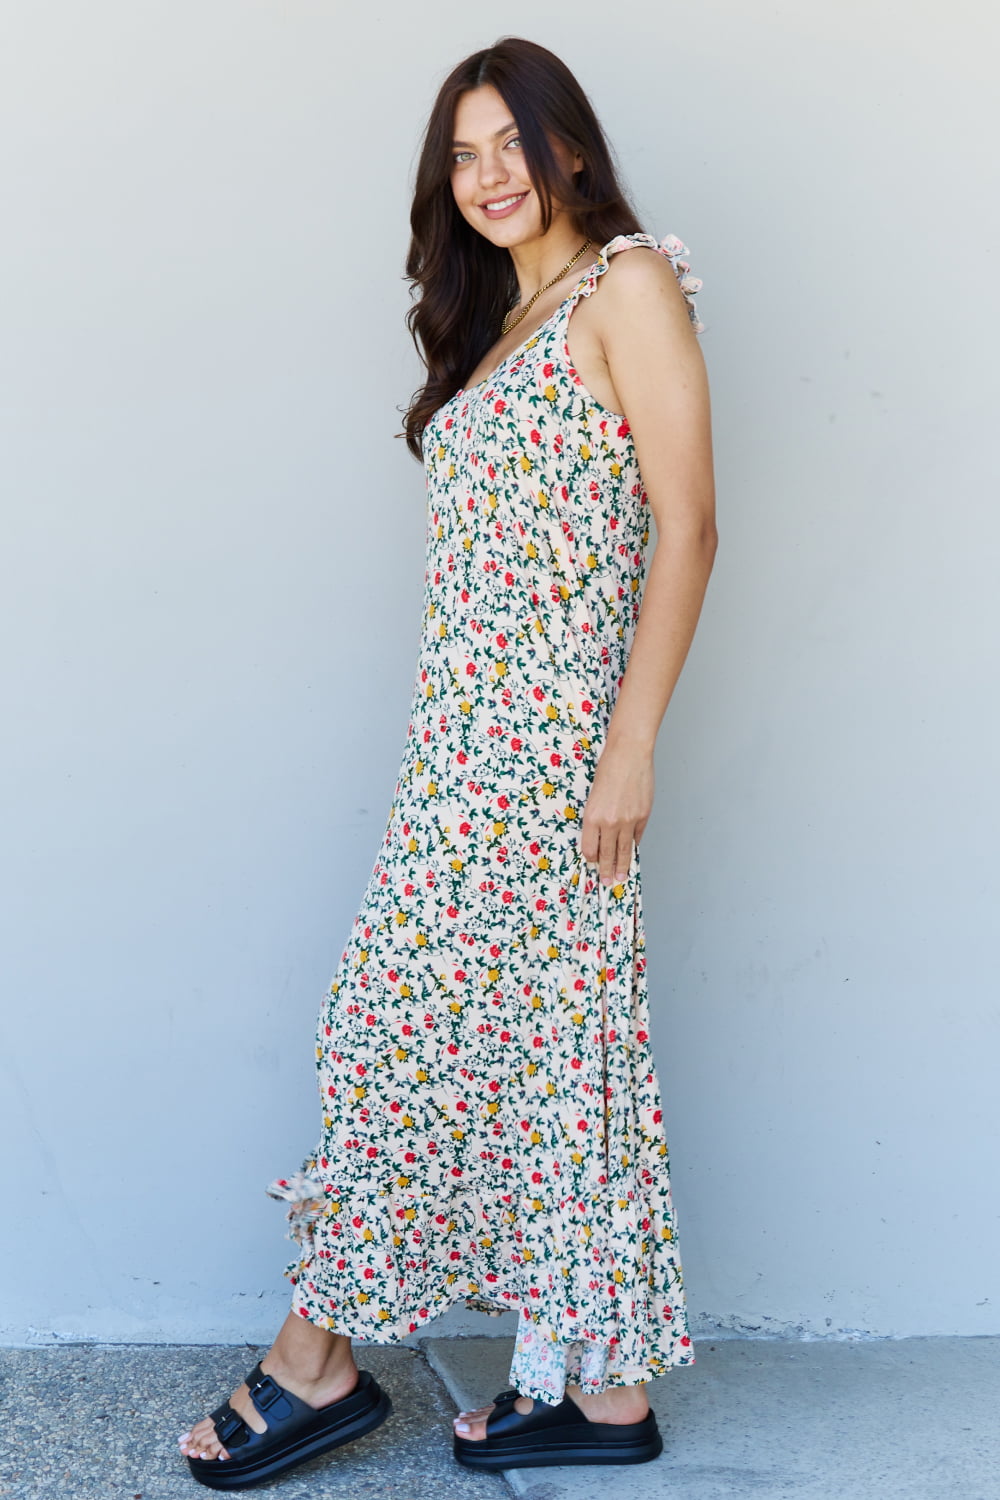 The Garden Ruffle Floral Maxi Dress in Natural Rose - All Dresses - Dresses - 4 - 2024